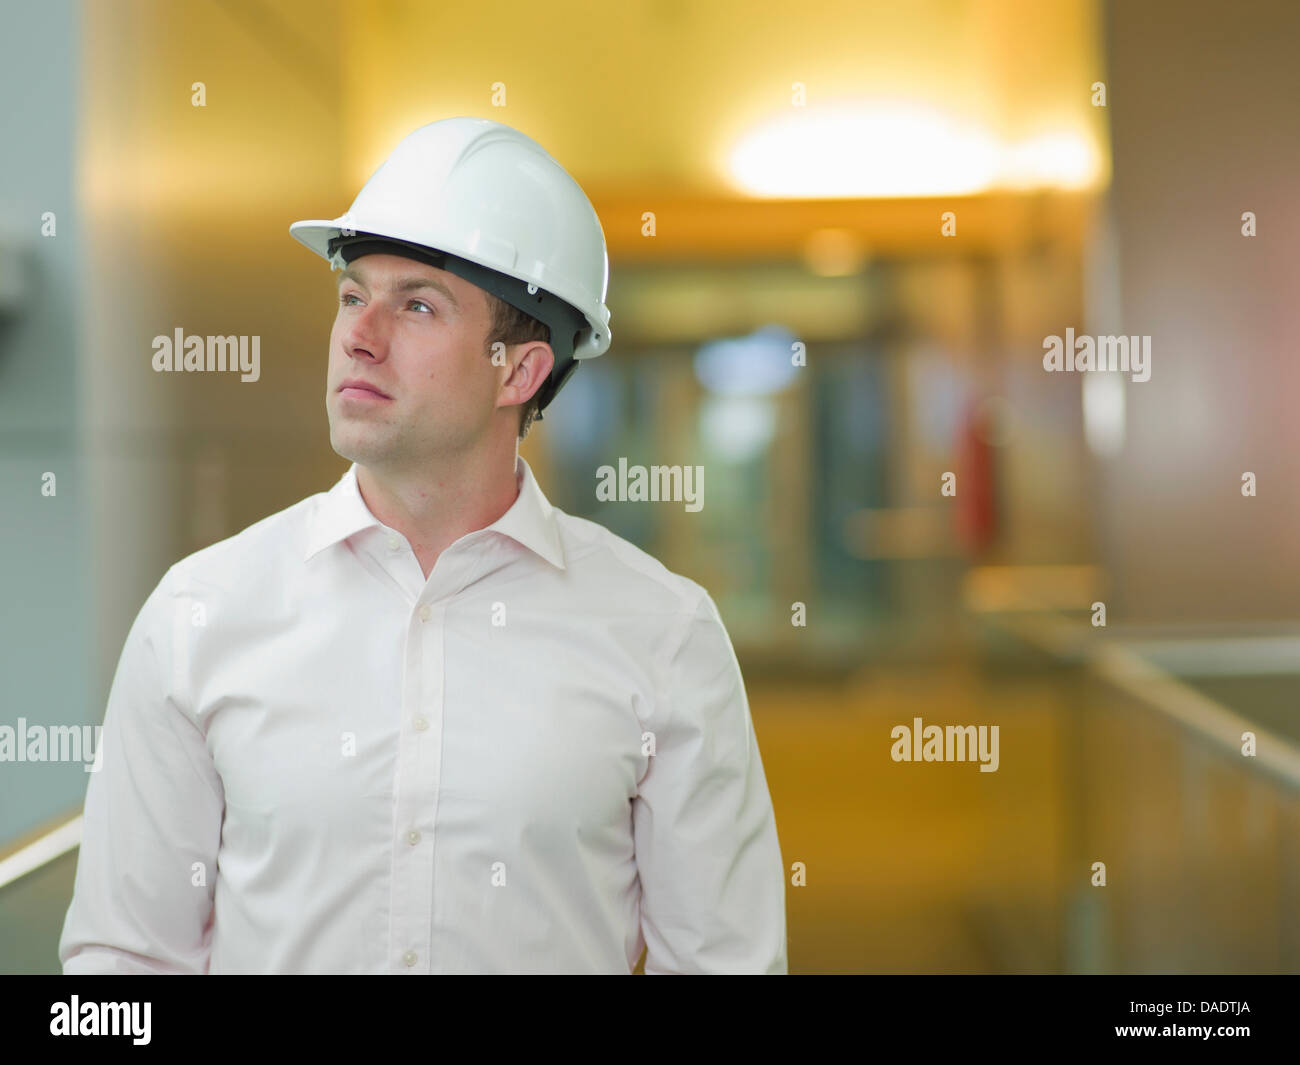 Young construction worker in hard hat, looking up Banque D'Images